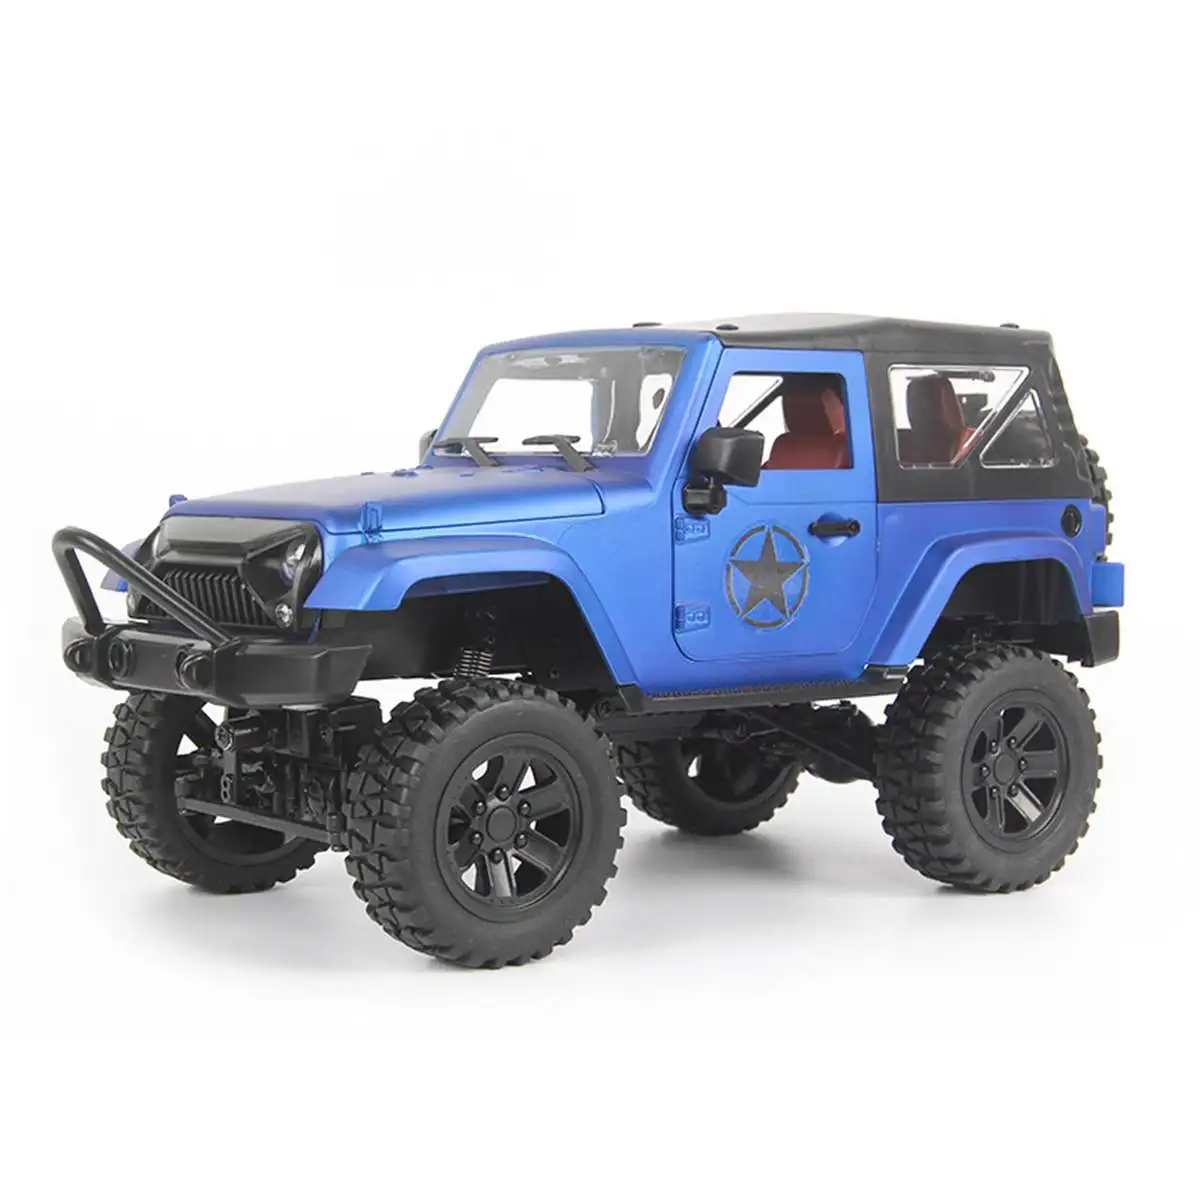 RBR/C RB F1 F2 1/14 2.4G 4WD RC Car Off-Road Crawler All Proportional RTR Remote Control Vehicle Electric Models Toys for Kids enlarge